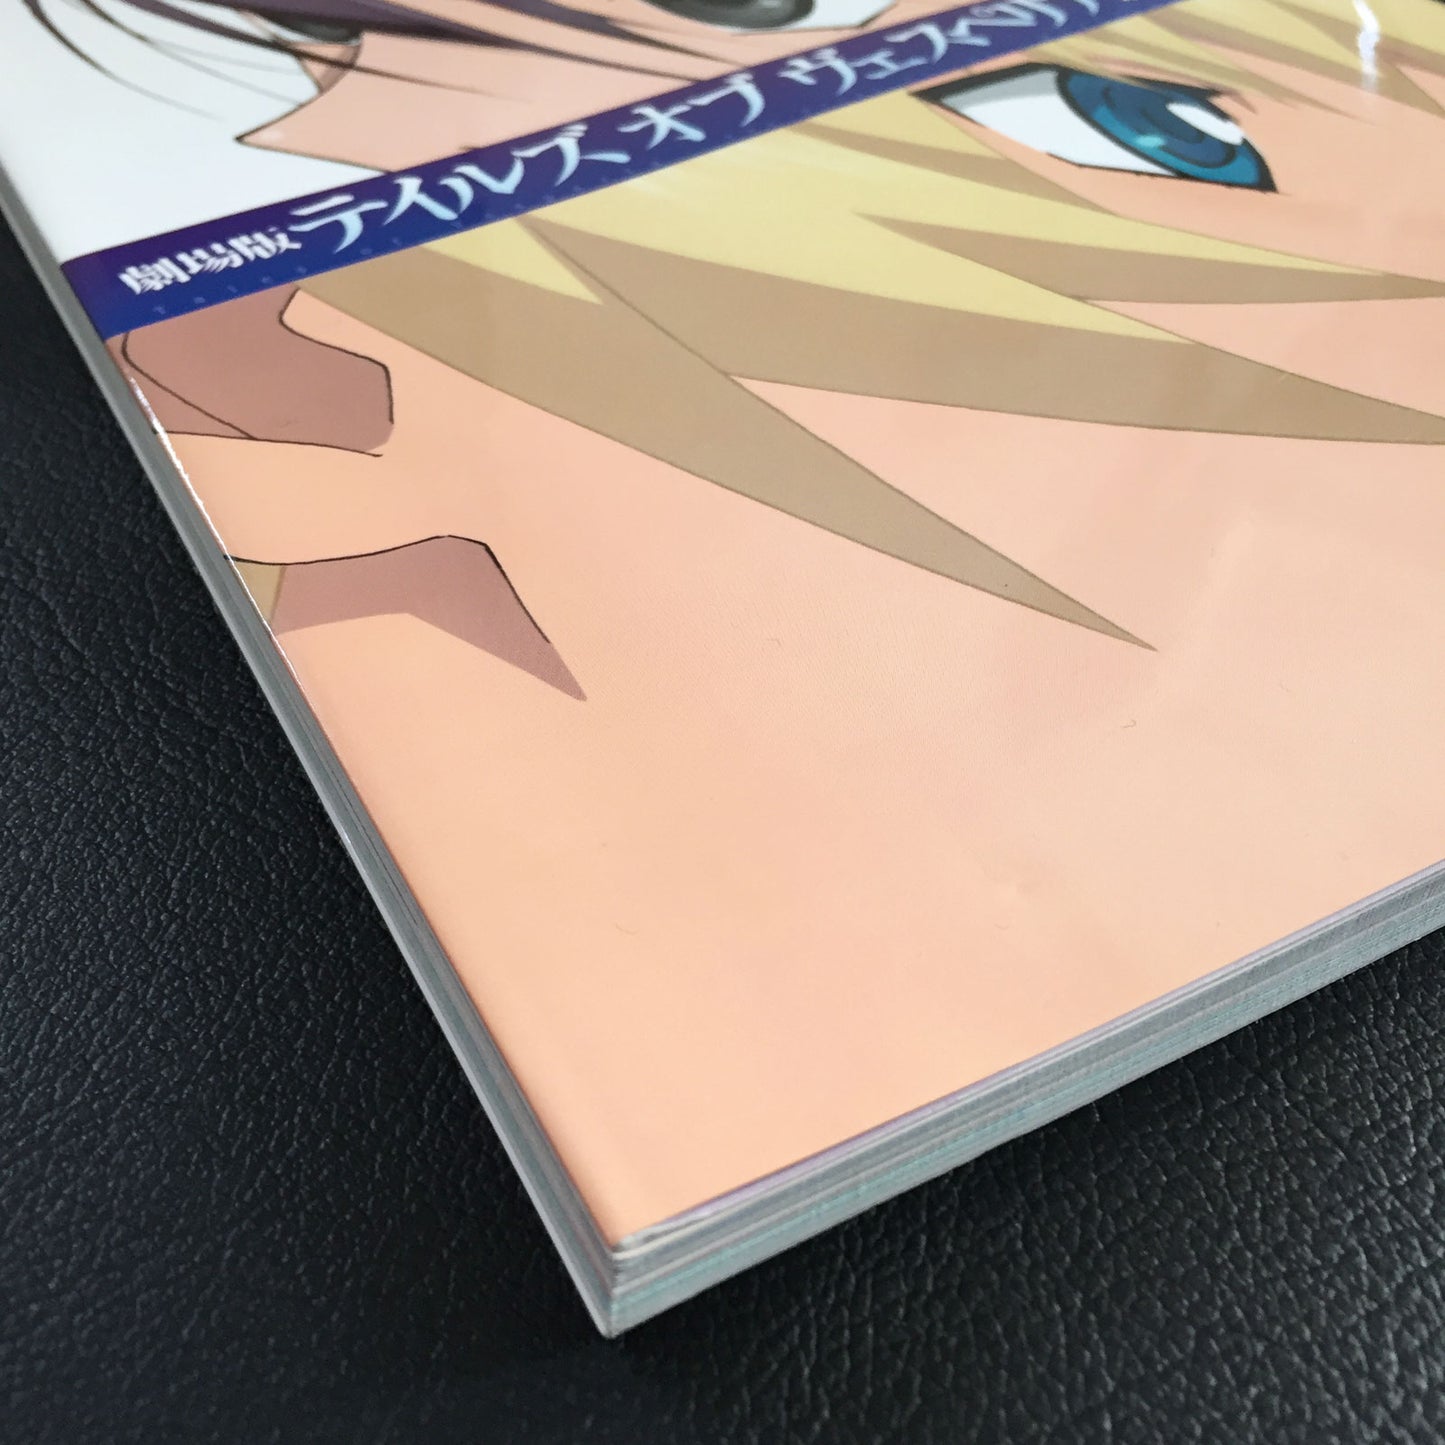 Tales of Vesperia: The First Strike Official Fan Book